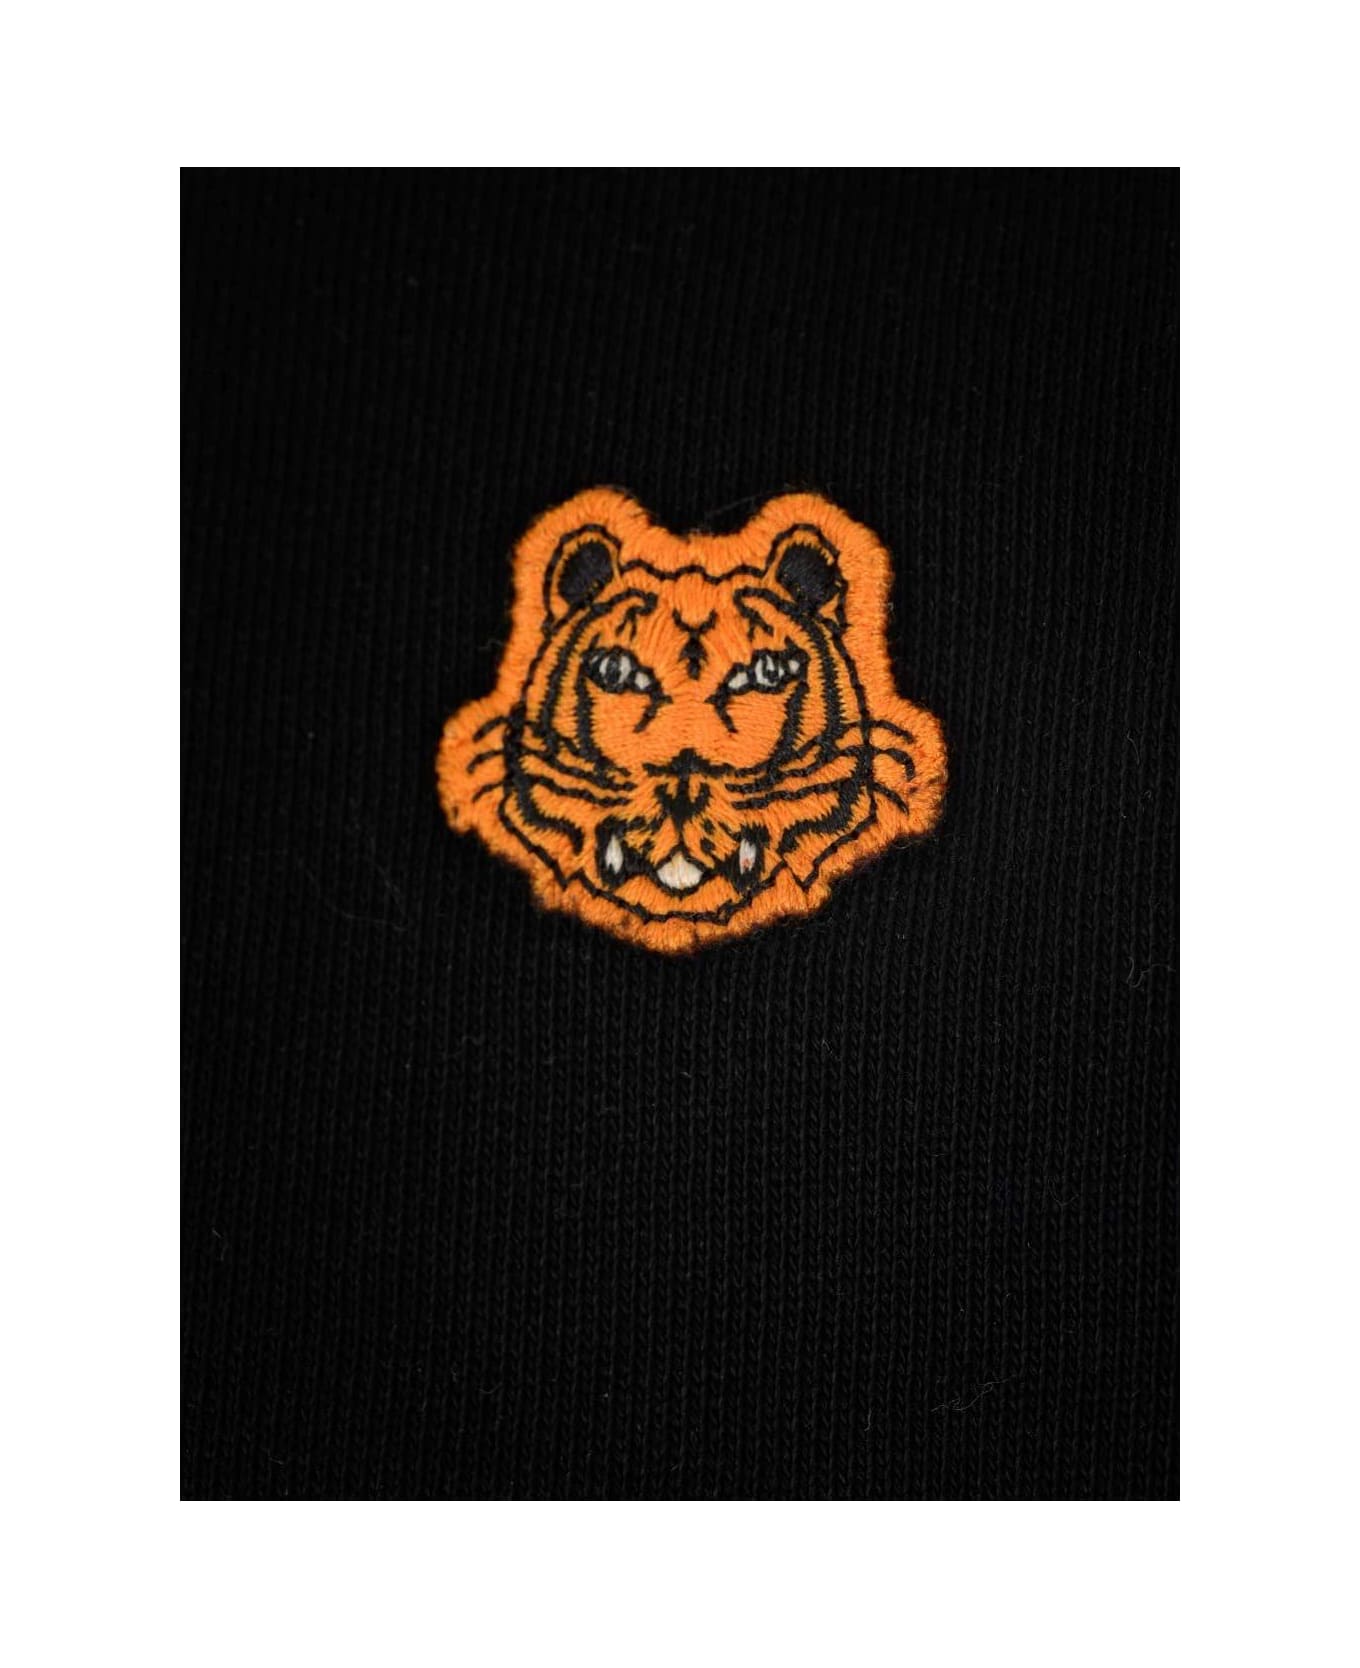 Kenzo Tiger Crest Embroidered Hoodie - Black